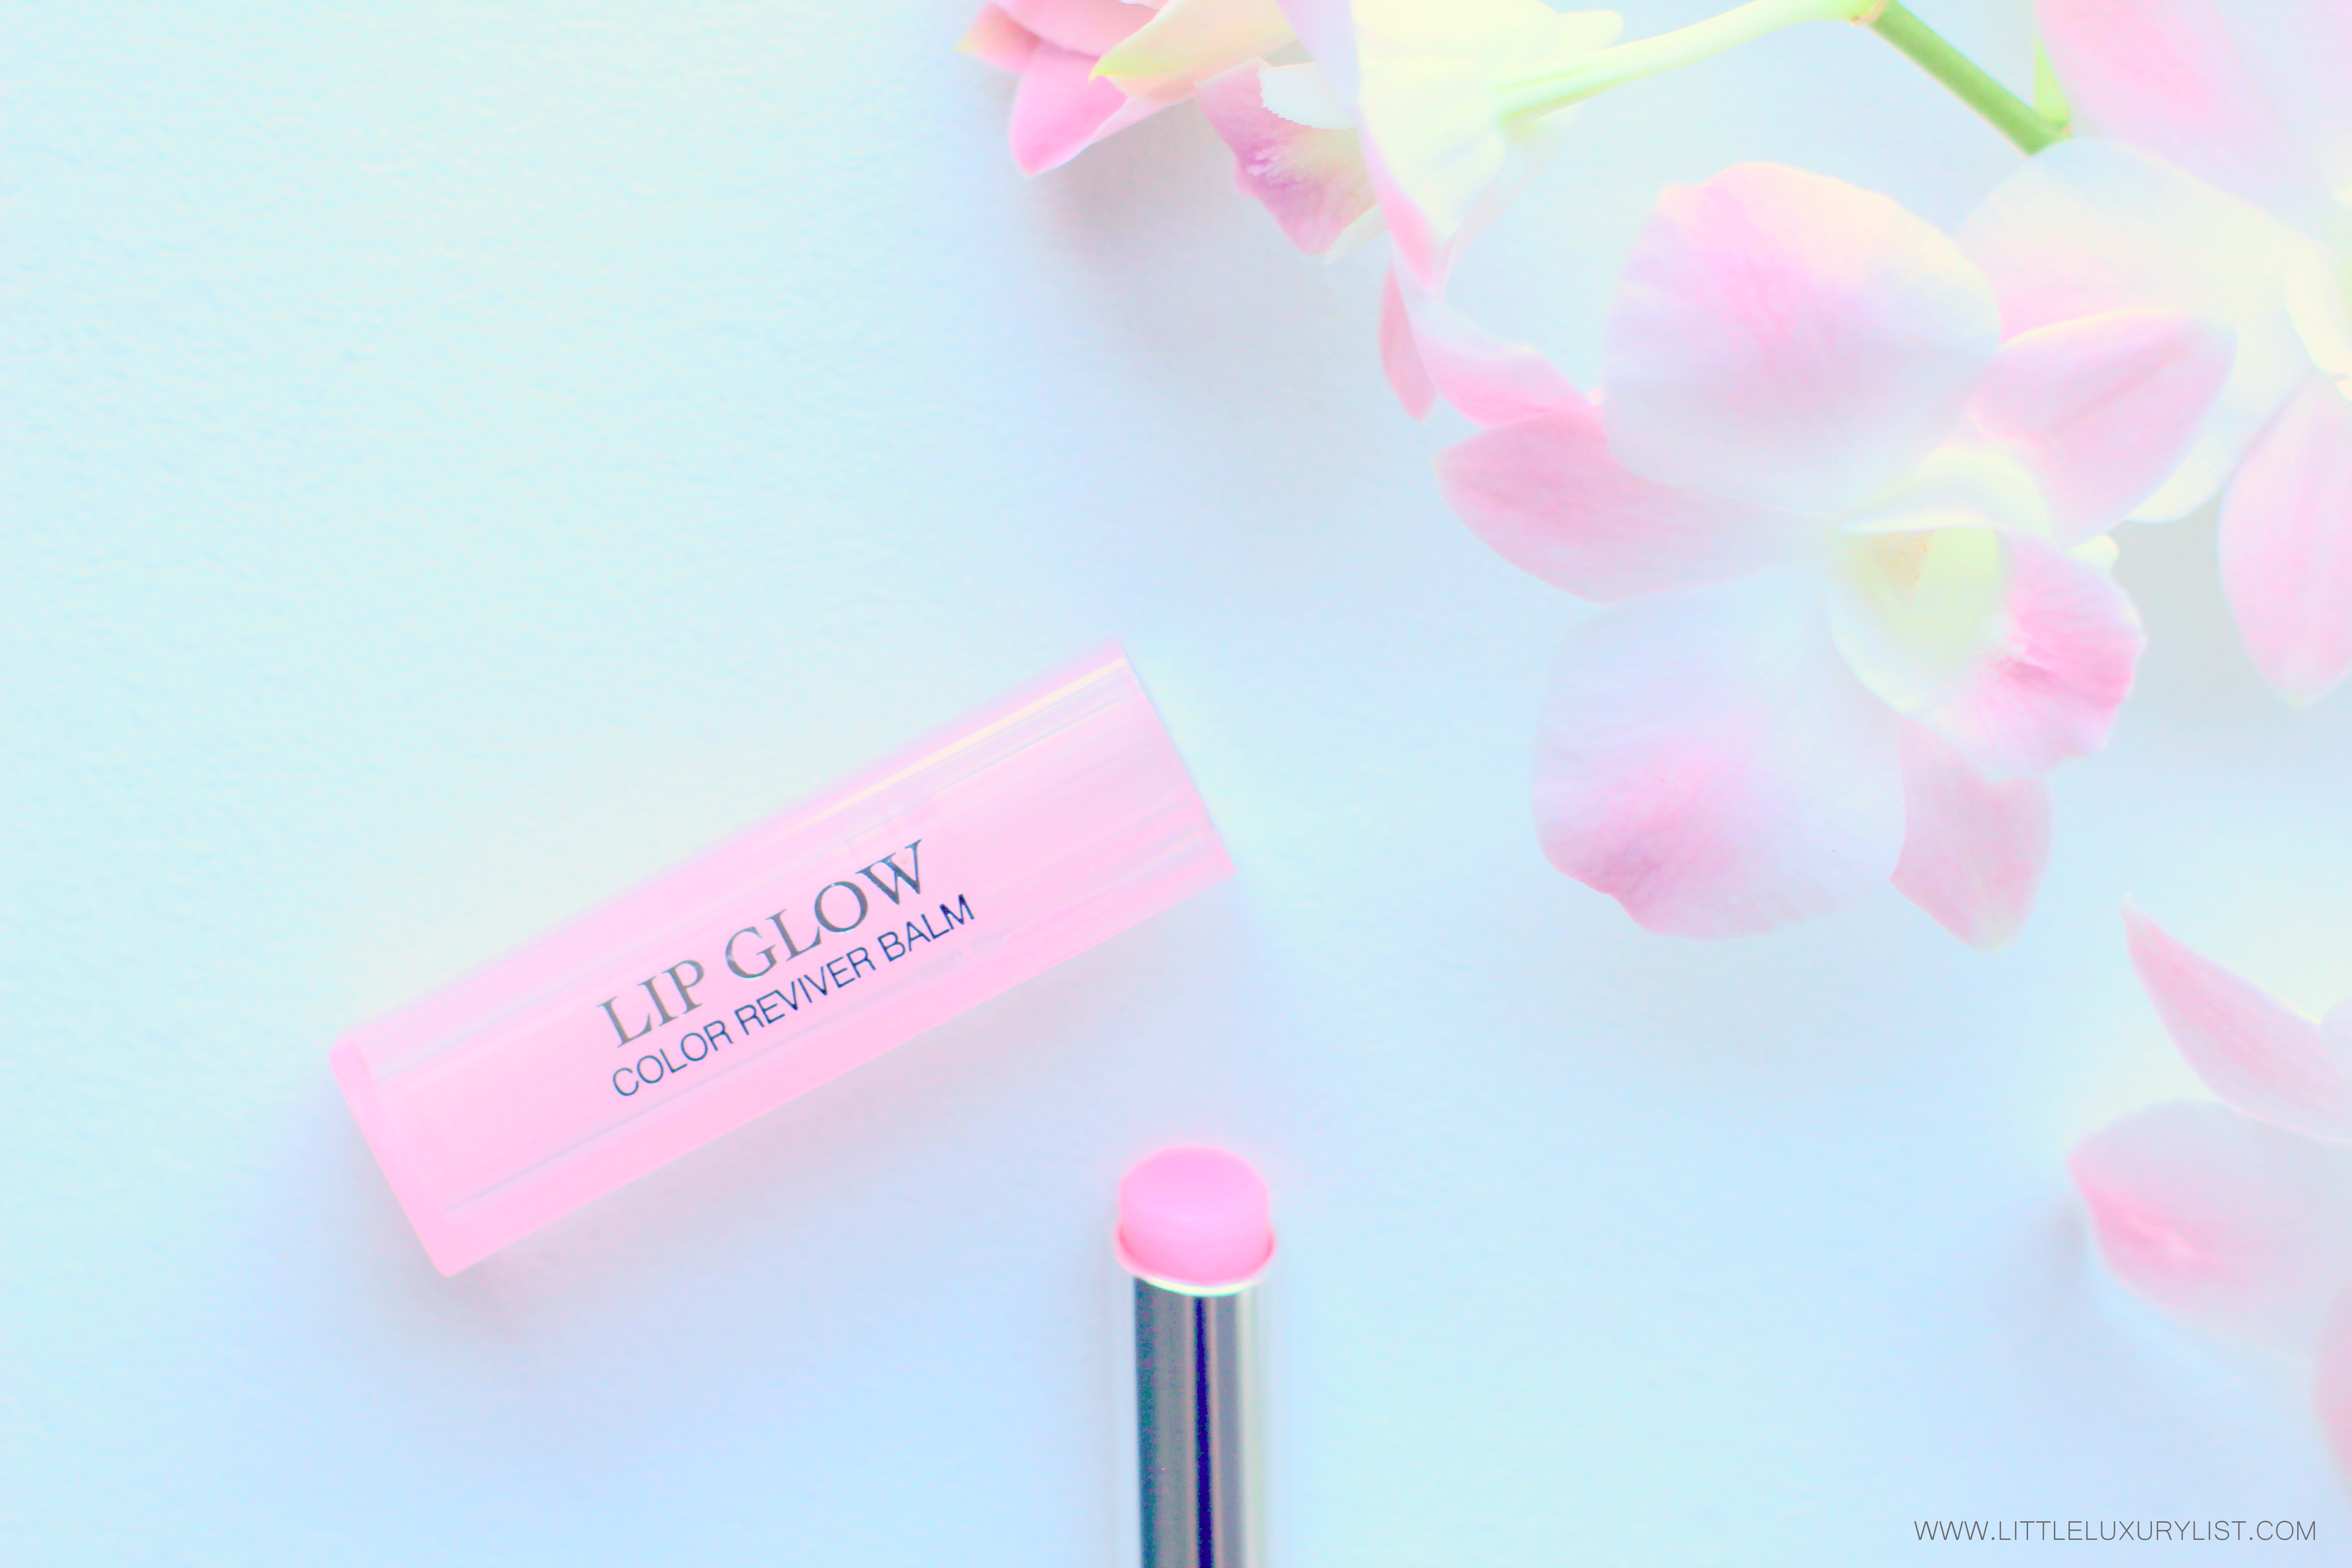 dior-lip-glow-cover-review-by-little-luxury-list